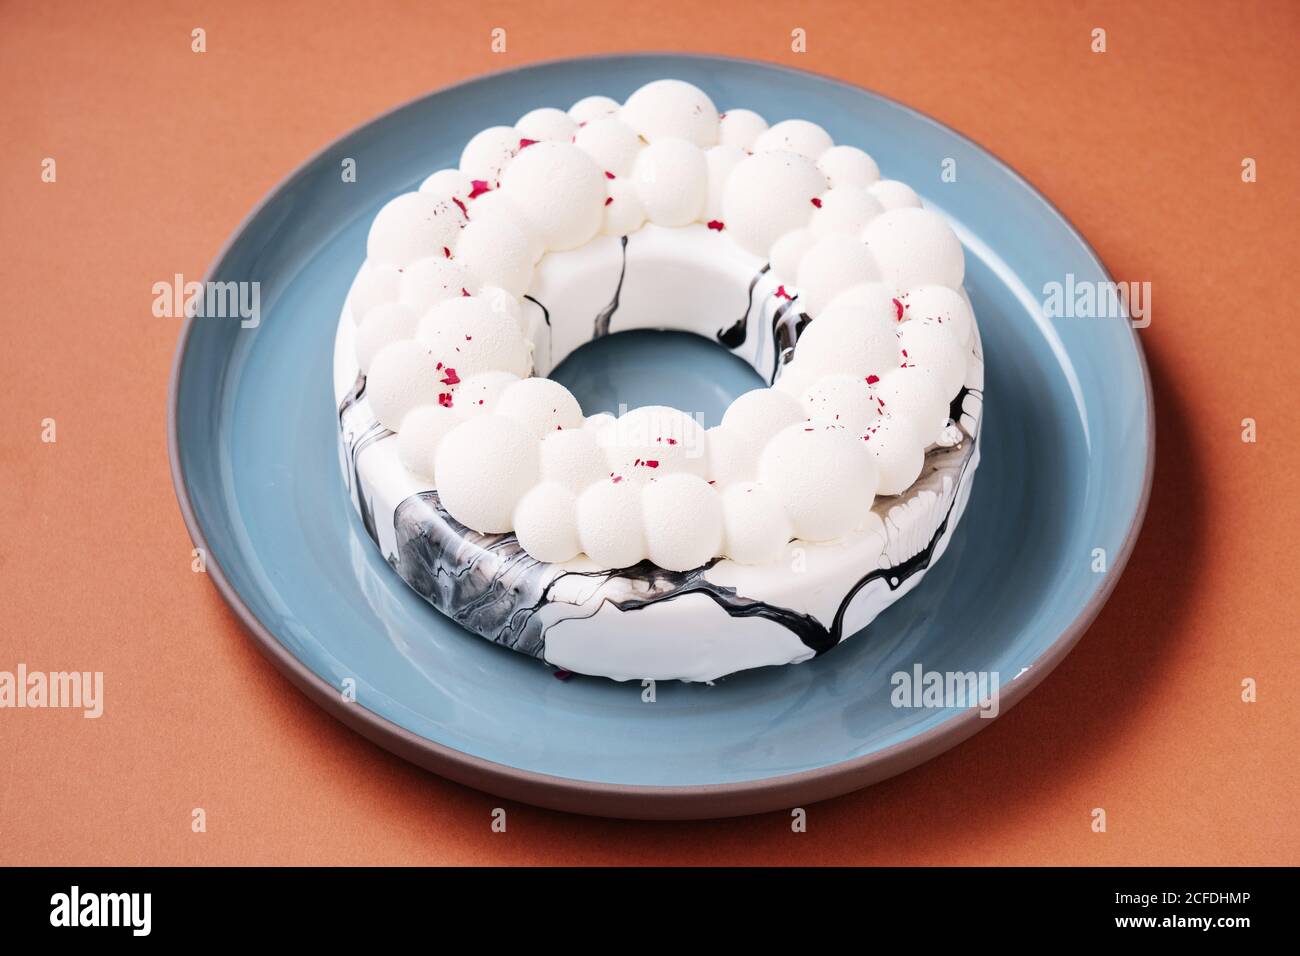 Ring shaped cake with sweet icing Stock Photo - Alamy